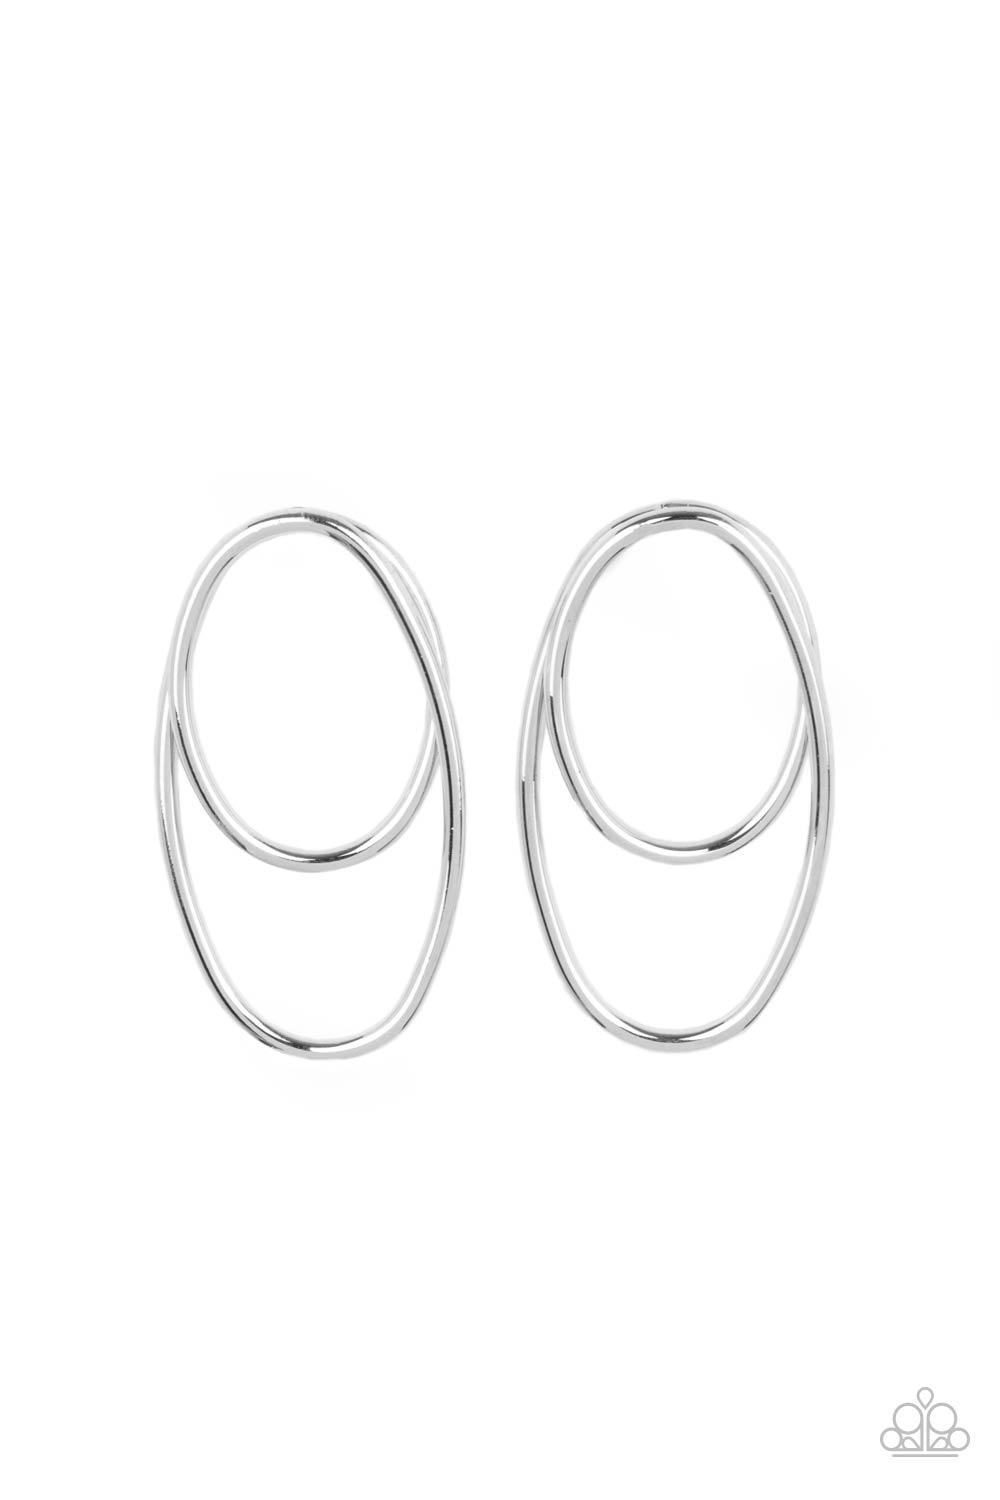 So OVAL-Dramatic Silver Earring - Paparazzi Accessories  Shiny silver wires spin into a stacked oval frame, creating a dizzying look. Earring attaches to a standard post fitting.  All Paparazzi Accessories are lead free and nickel free!  Sold as one pair of post earrings.